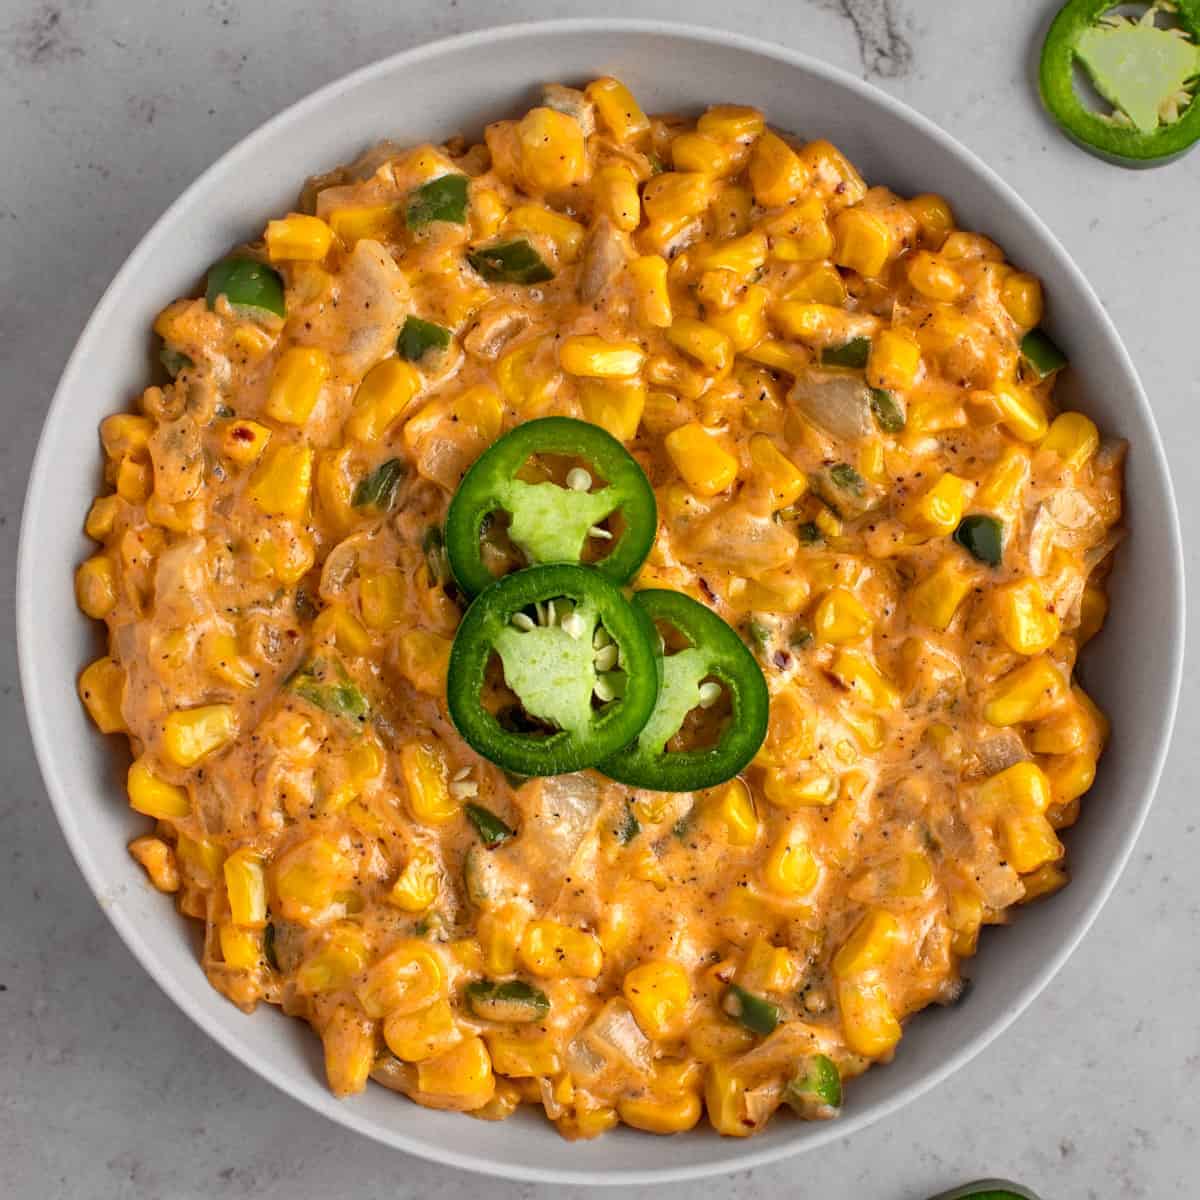 Overhead view of creamy jalapeno corn with slices of jalapeno on top.